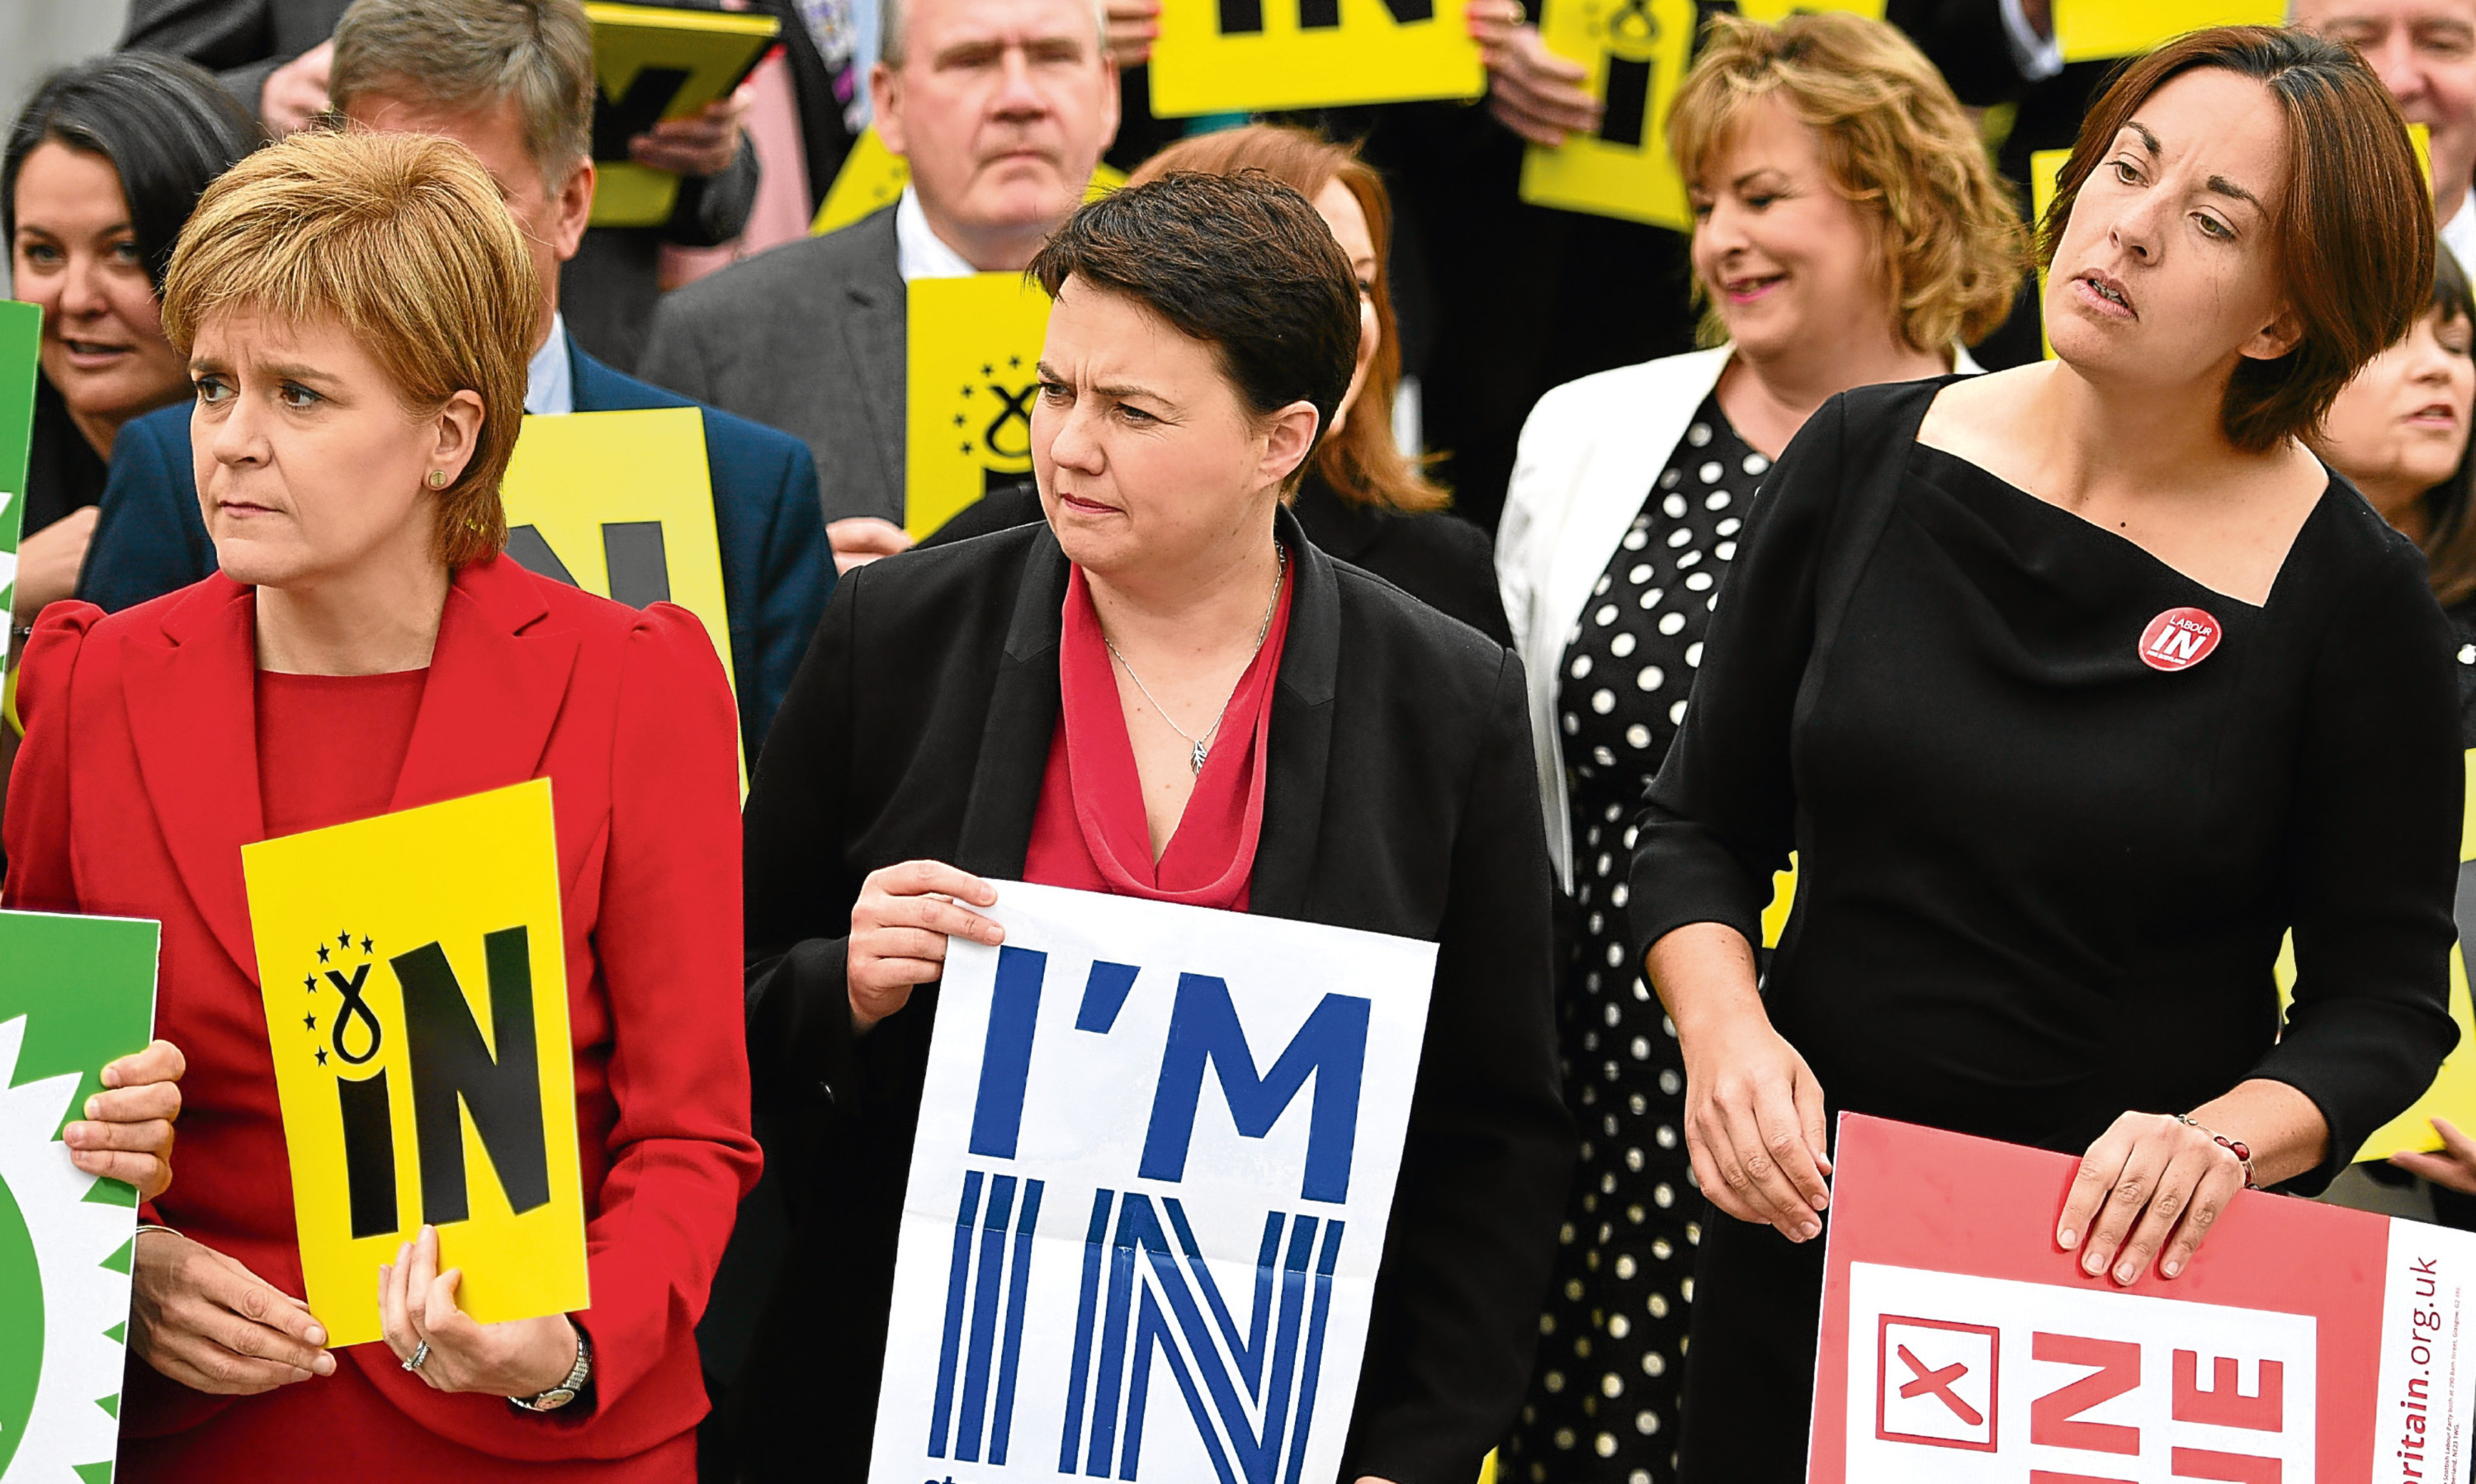 Nicola Sturgeon, Ruth Davidson and Kezia Dugdale were united on the referendum trail and may need to be just as united in discussing Scotlands future.